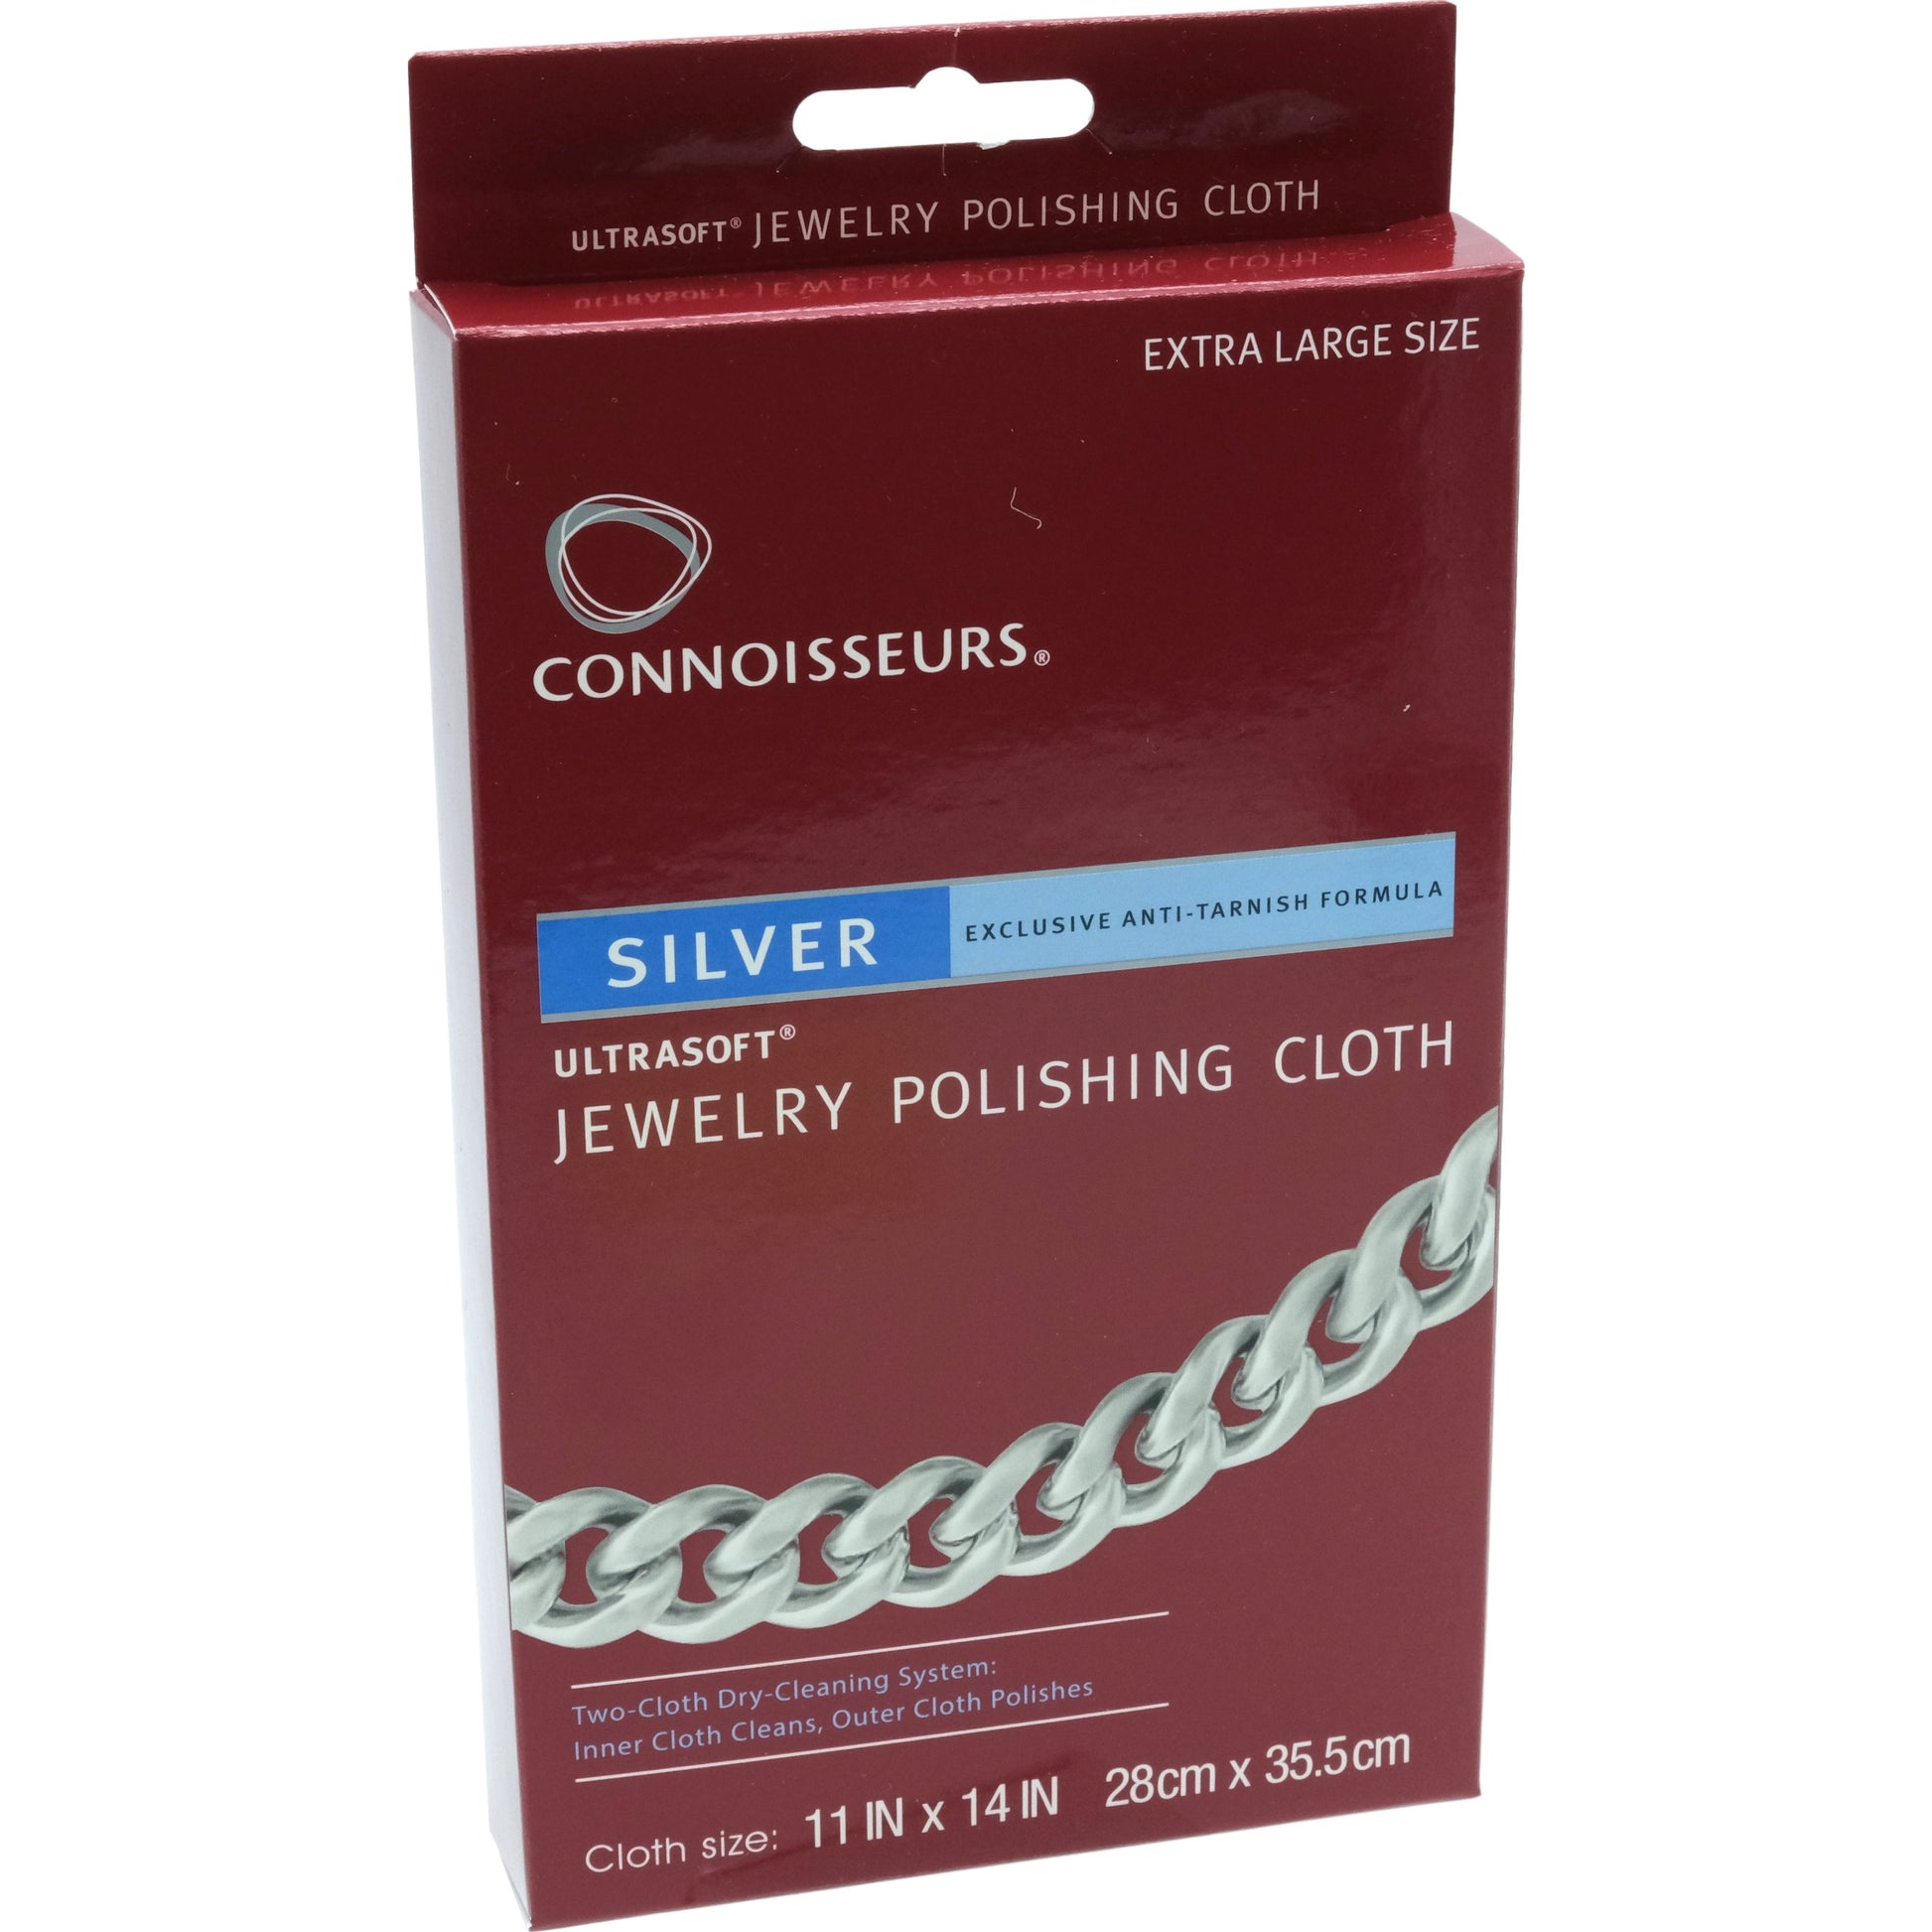 Findingking 2 Silver Polishing Cloths Clean Jewelry & Watches